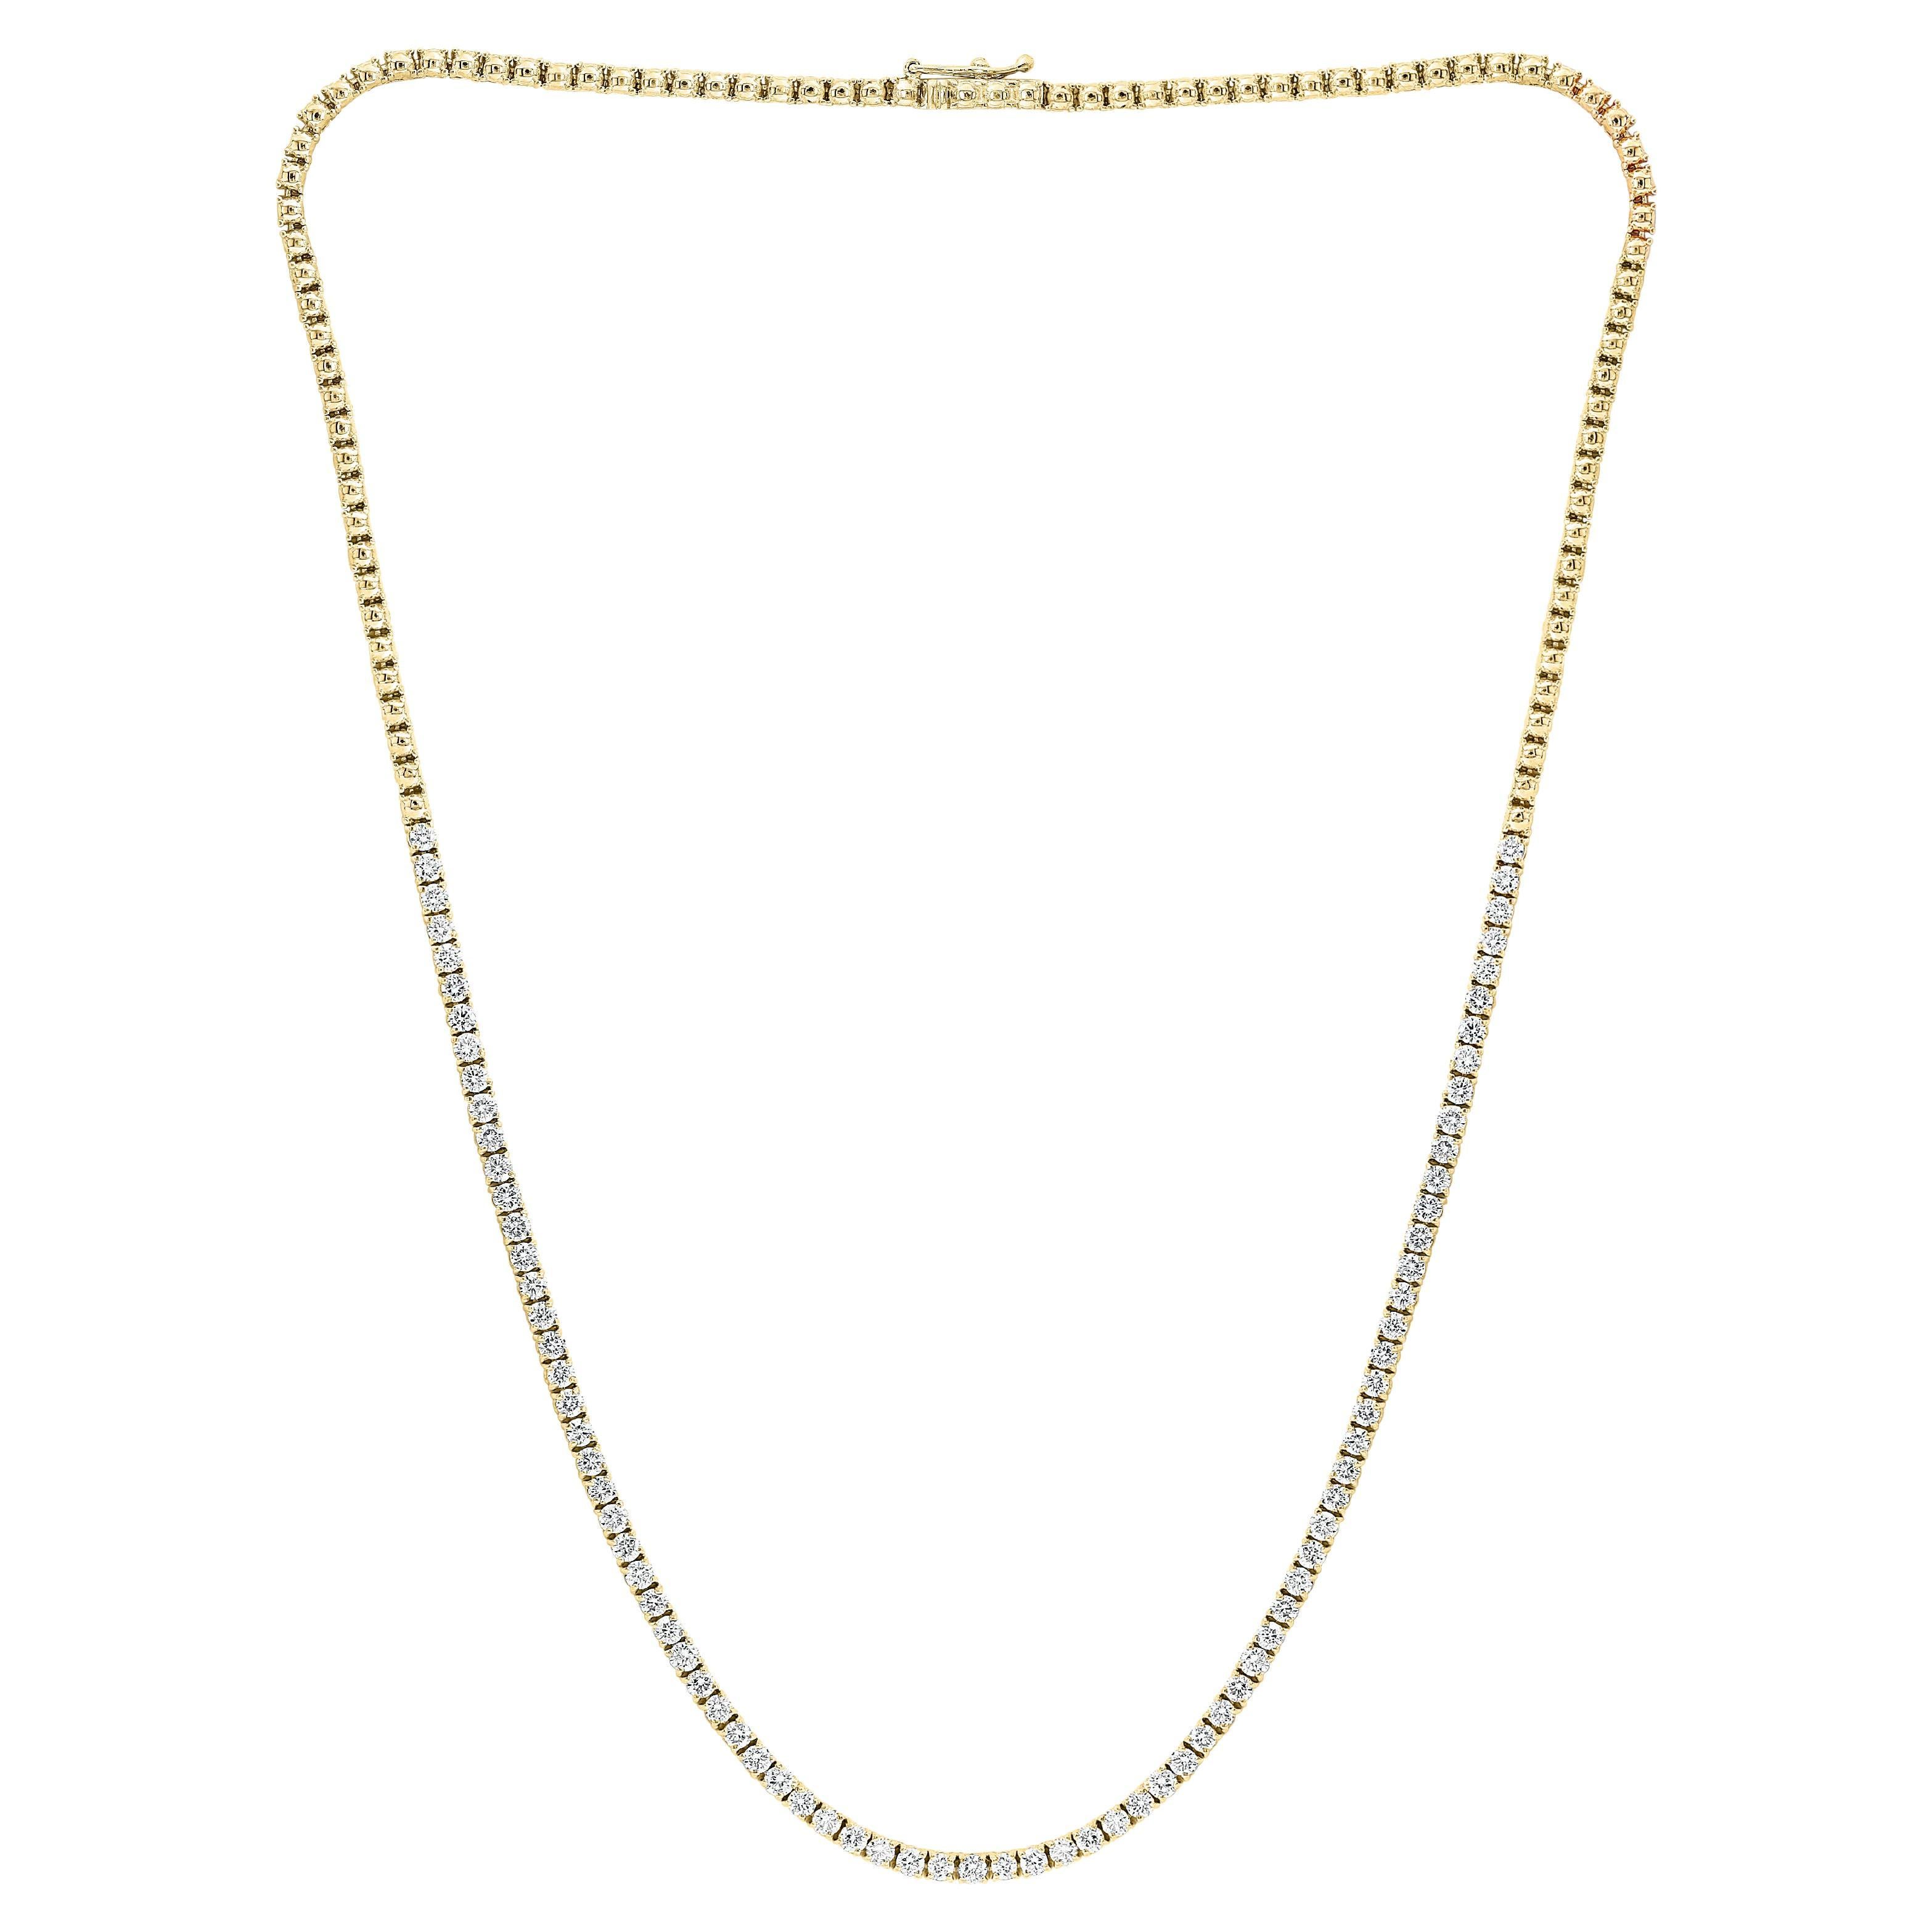 4.03 Carat Brilliant Round Cut Diamond Tennis Necklace in 14K Yellow Gold For Sale